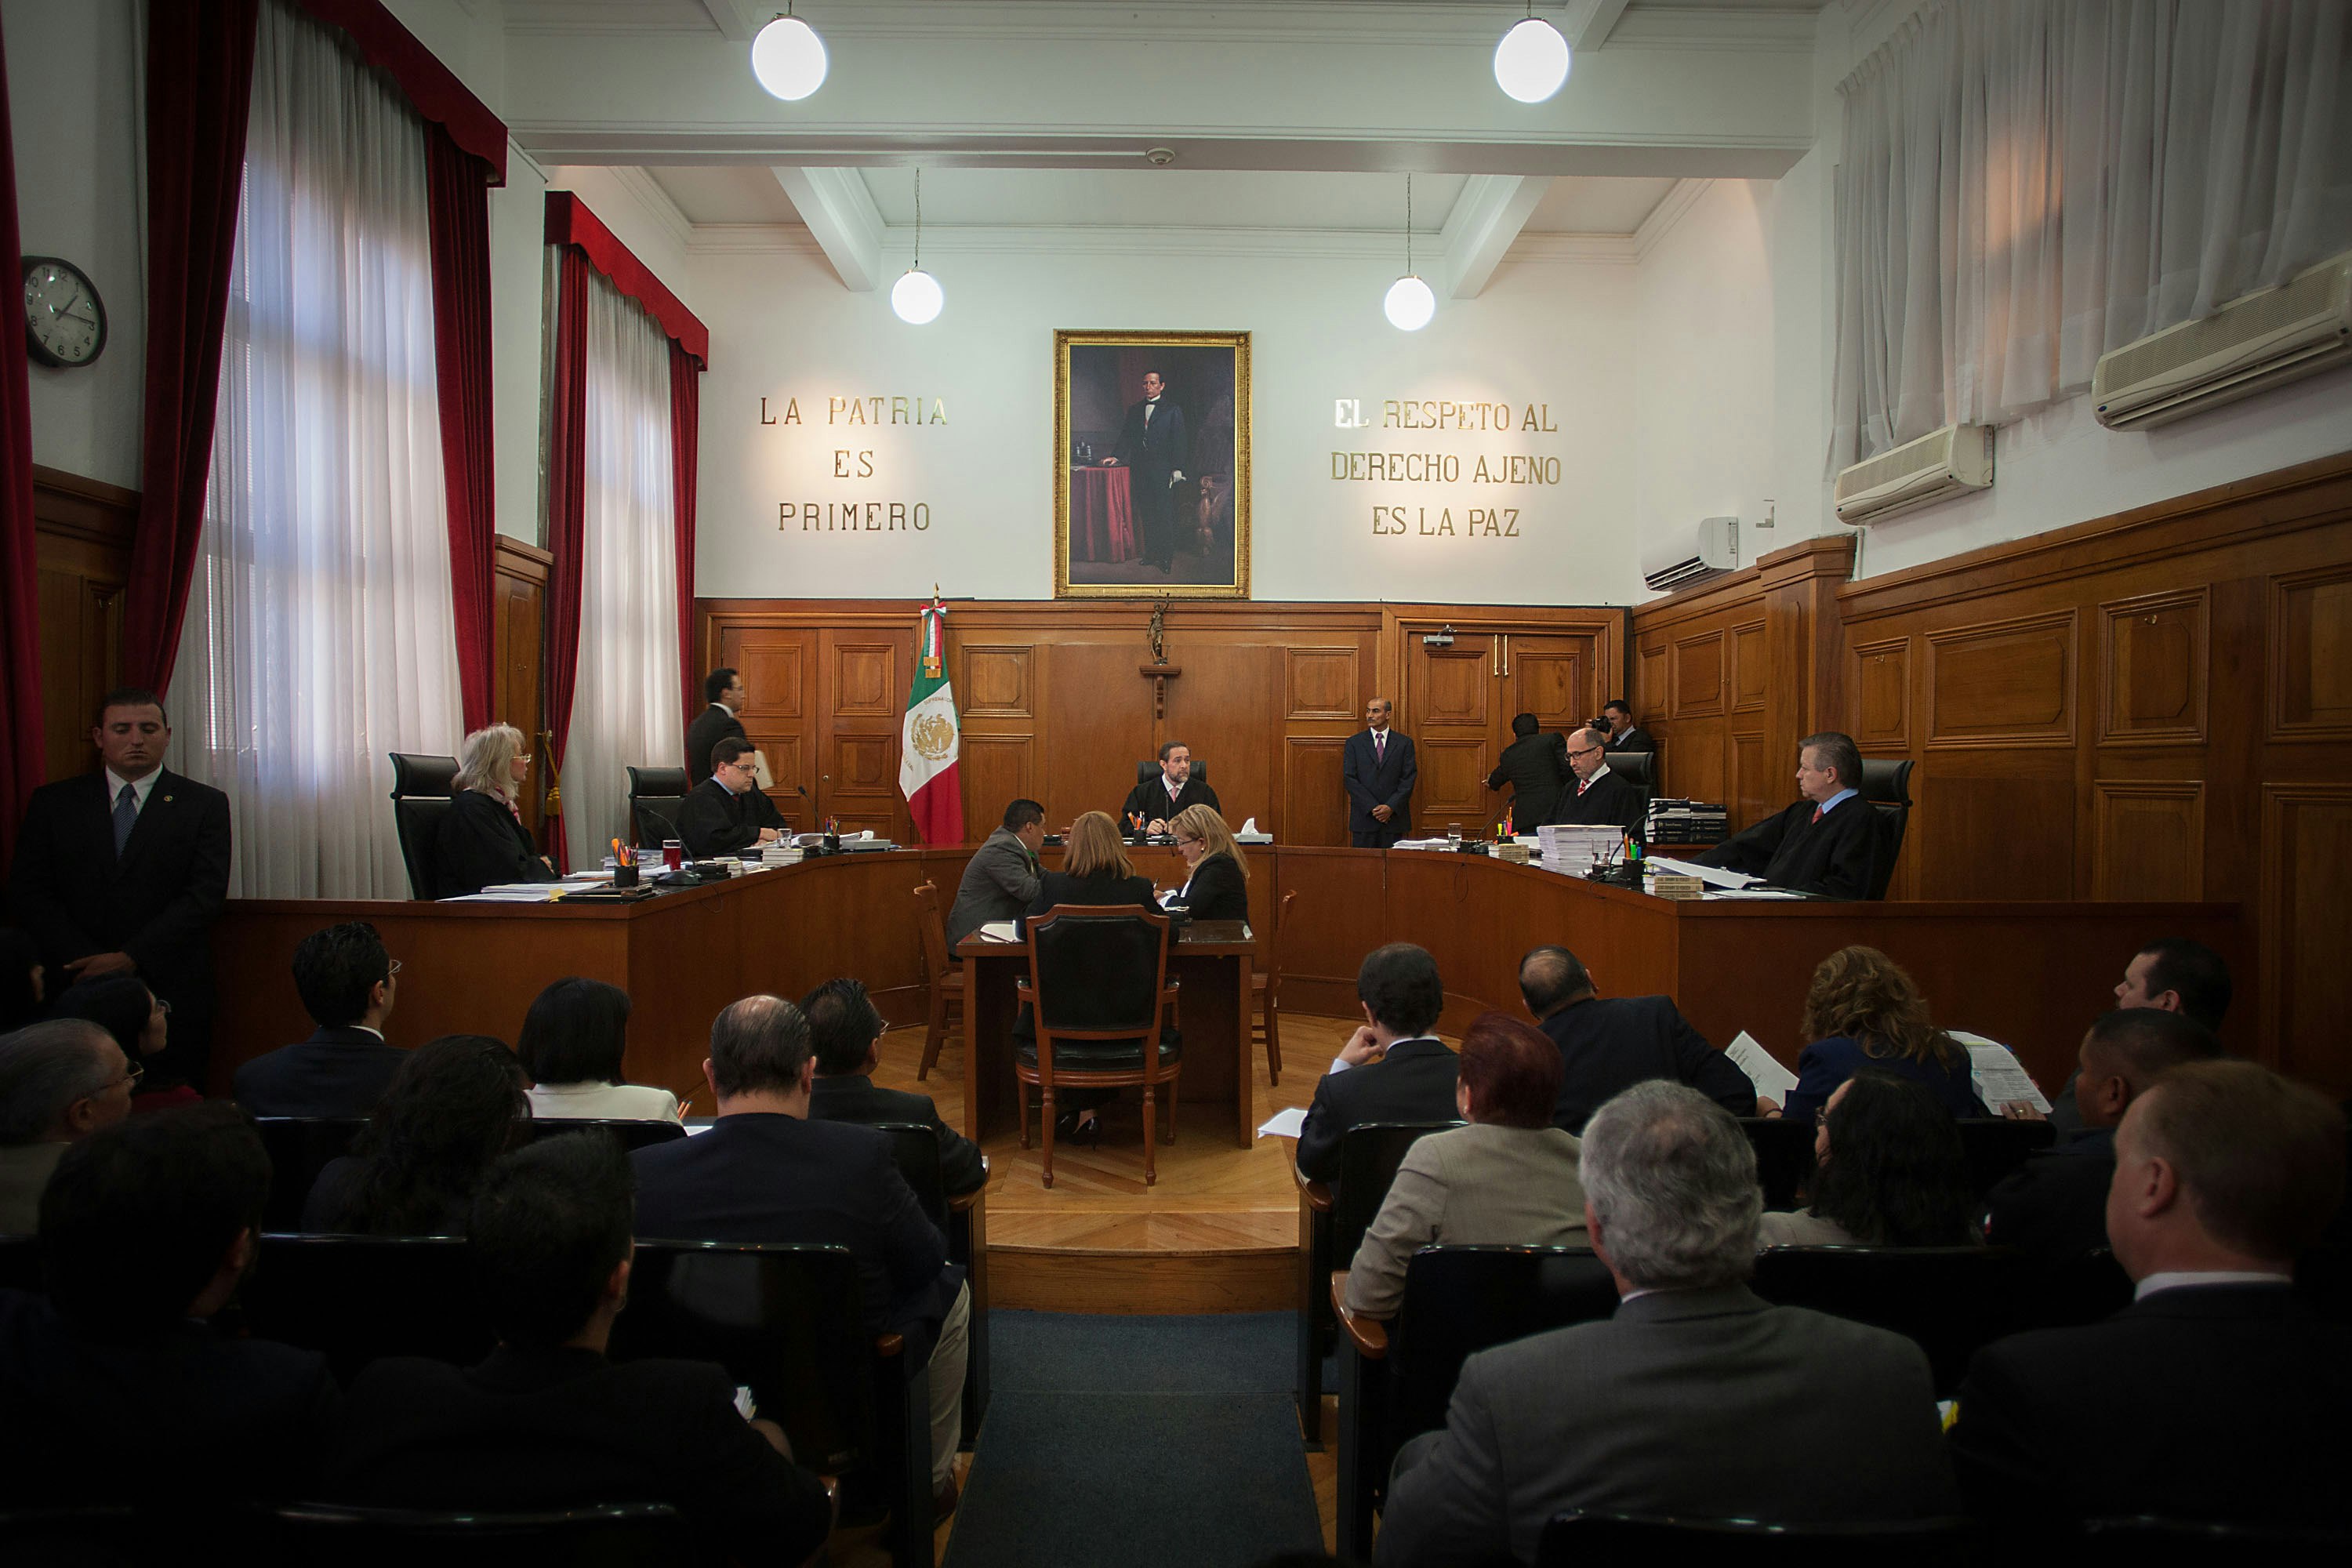 Judges in a courtroom.